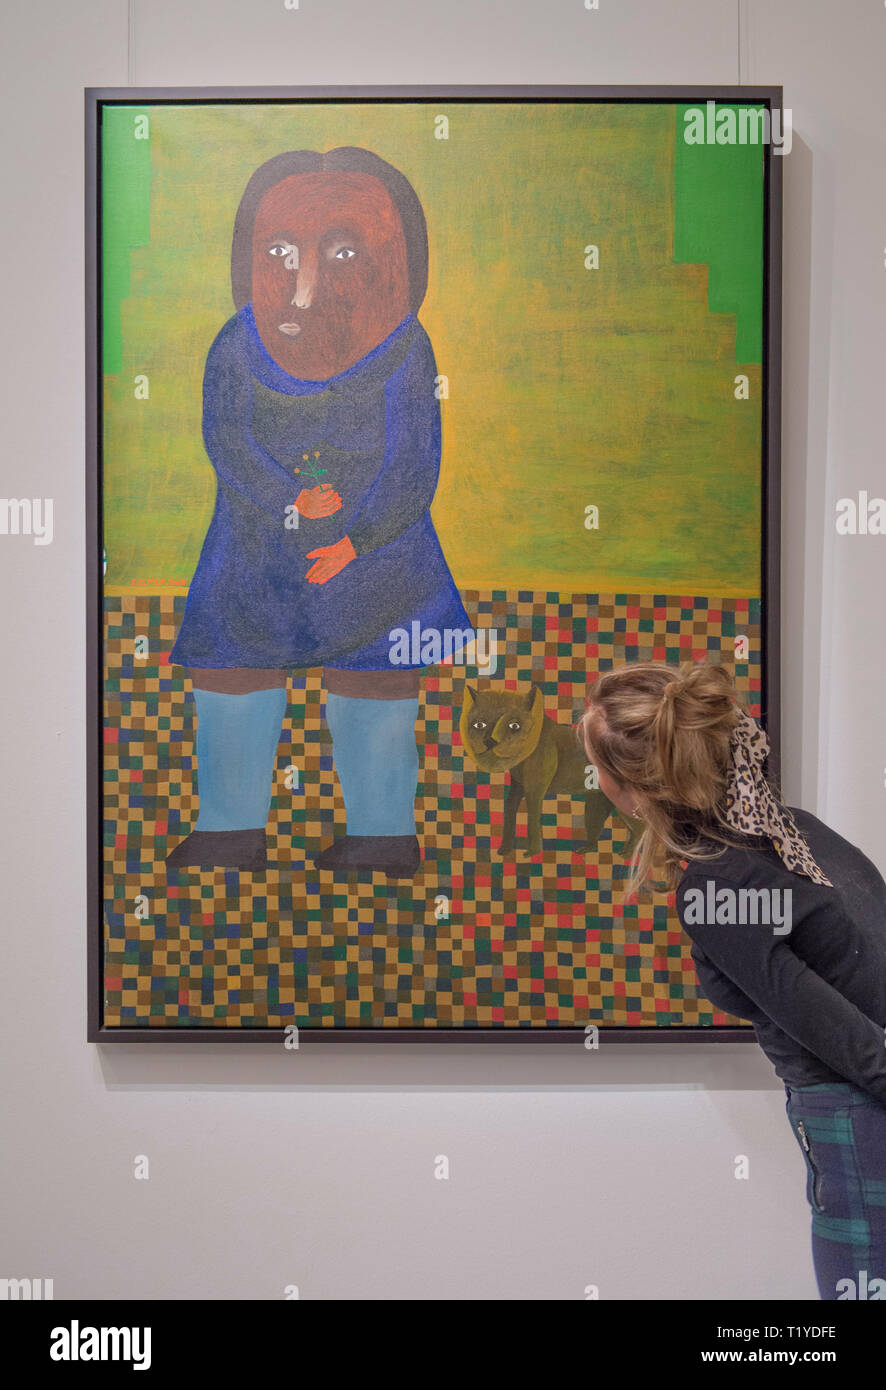 Sotheby’s London, UK. 29 March, 2019. Pre-sale exhibition of Modern and Contemporary African Art, showing the work of artists from across the African diaspora. Image: Salah Elmur, A Cat and a Girl. Estimate £10,000-15,000. Credit: Malcolm Park/Alamy Live News. Stock Photo